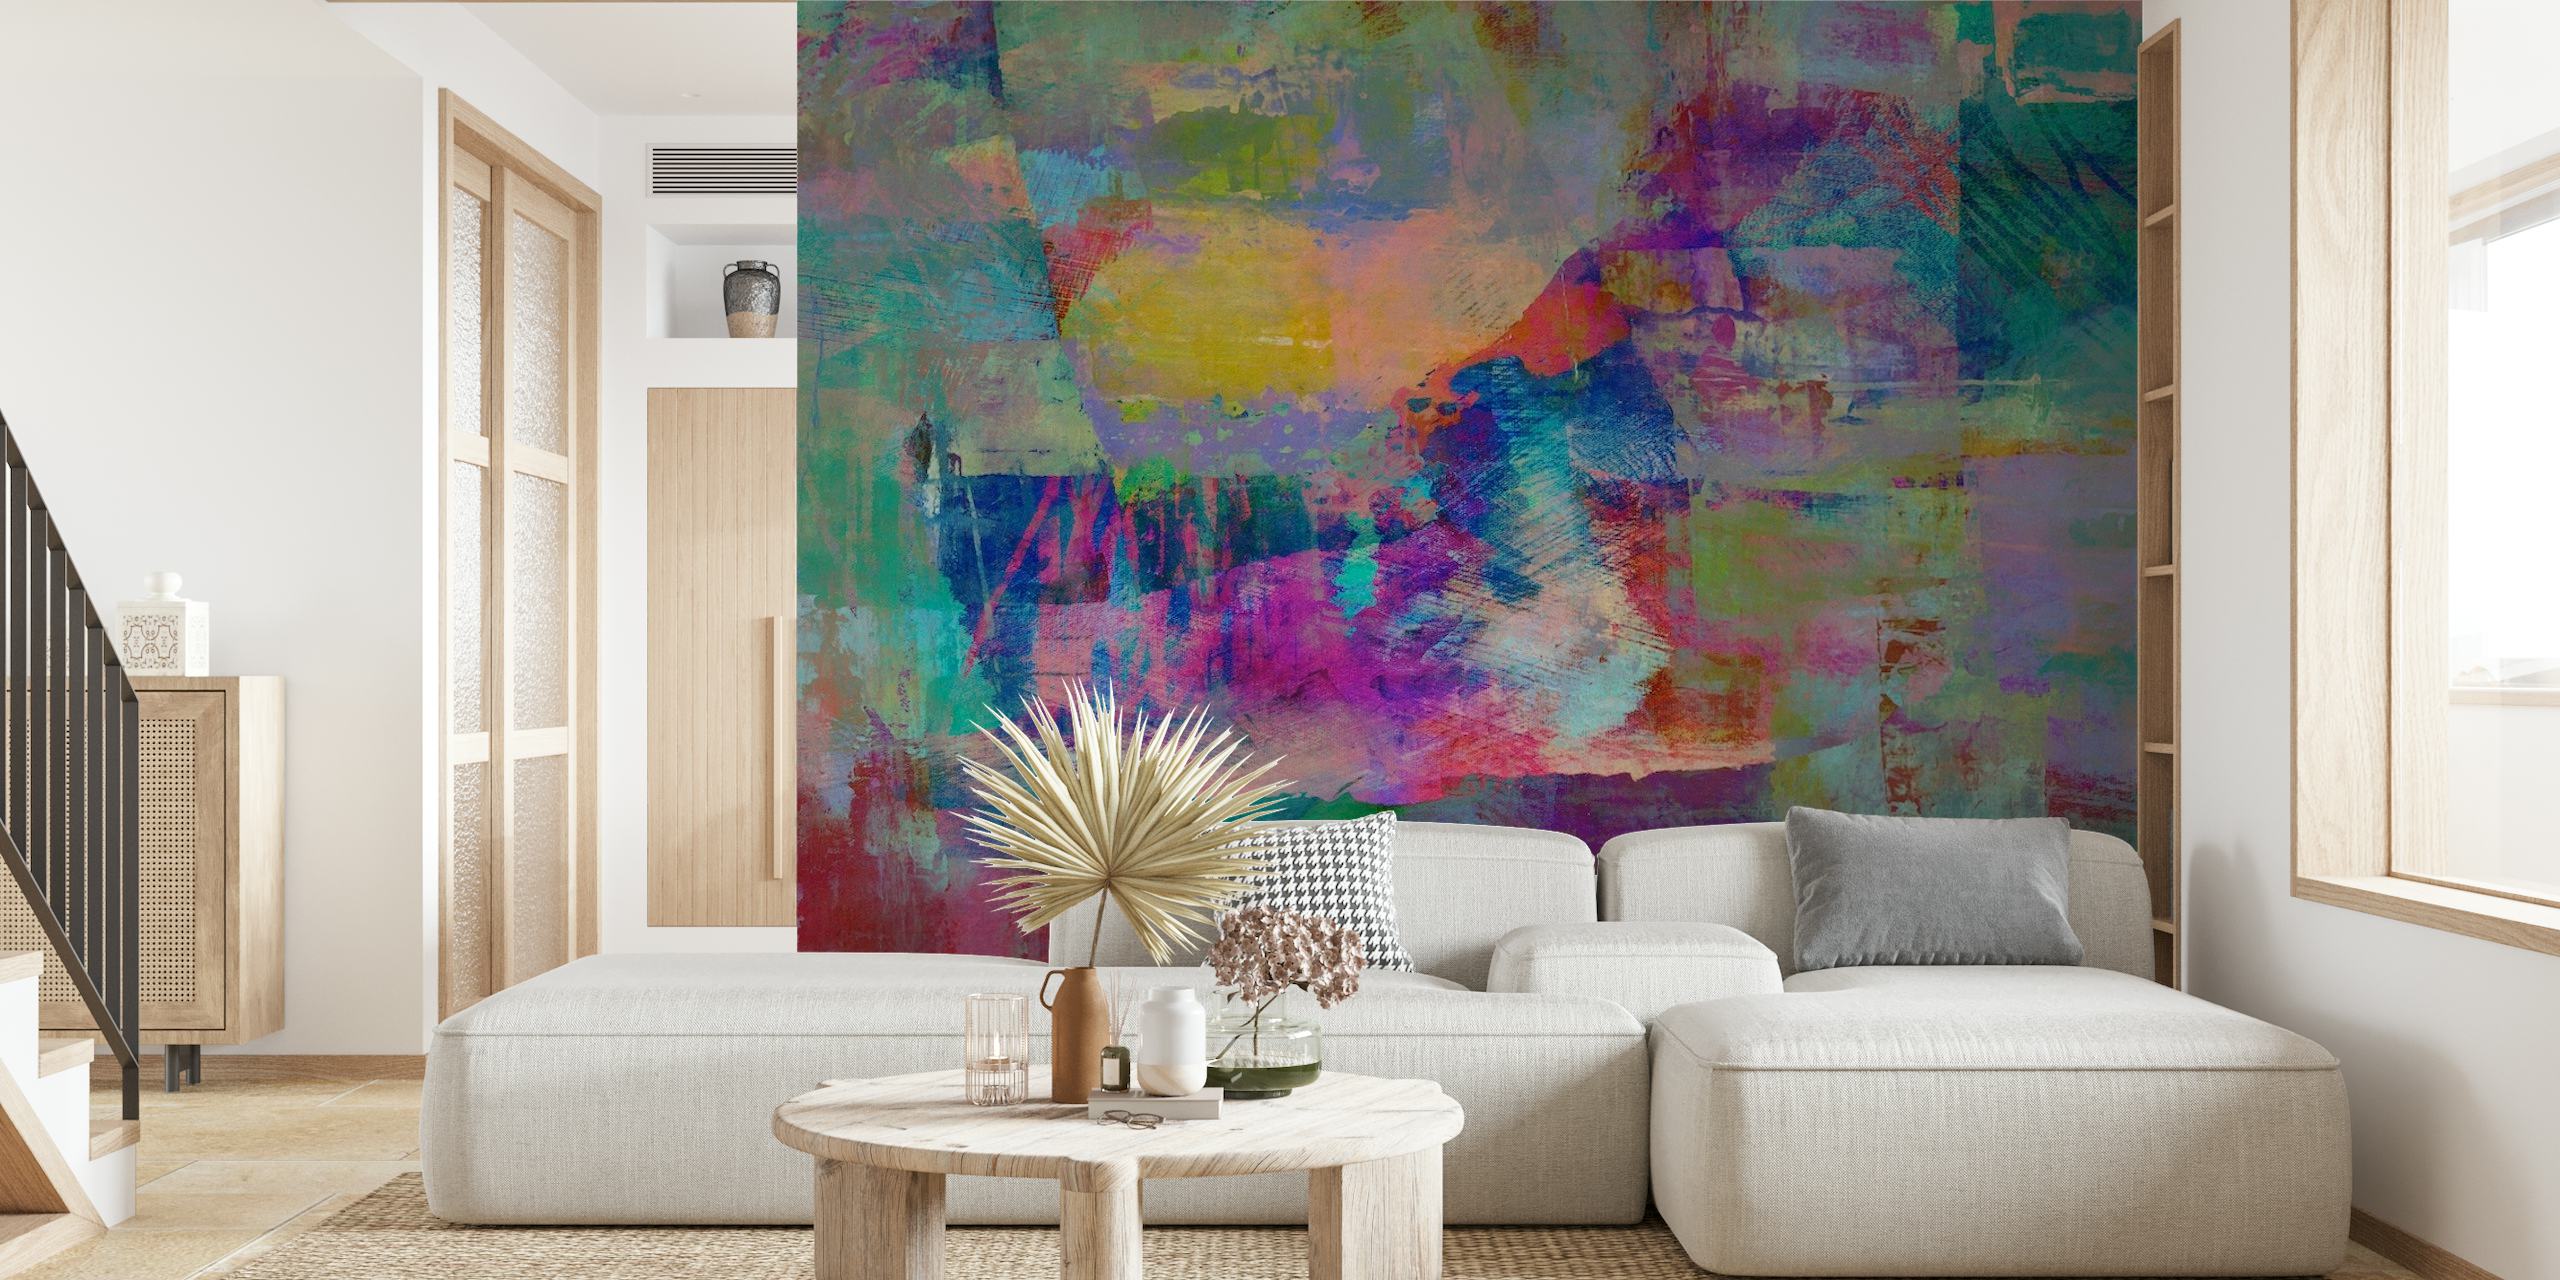 Rustic Abstract 7 In wall mural featuring a blend of turquoise, pink, and yellow textures